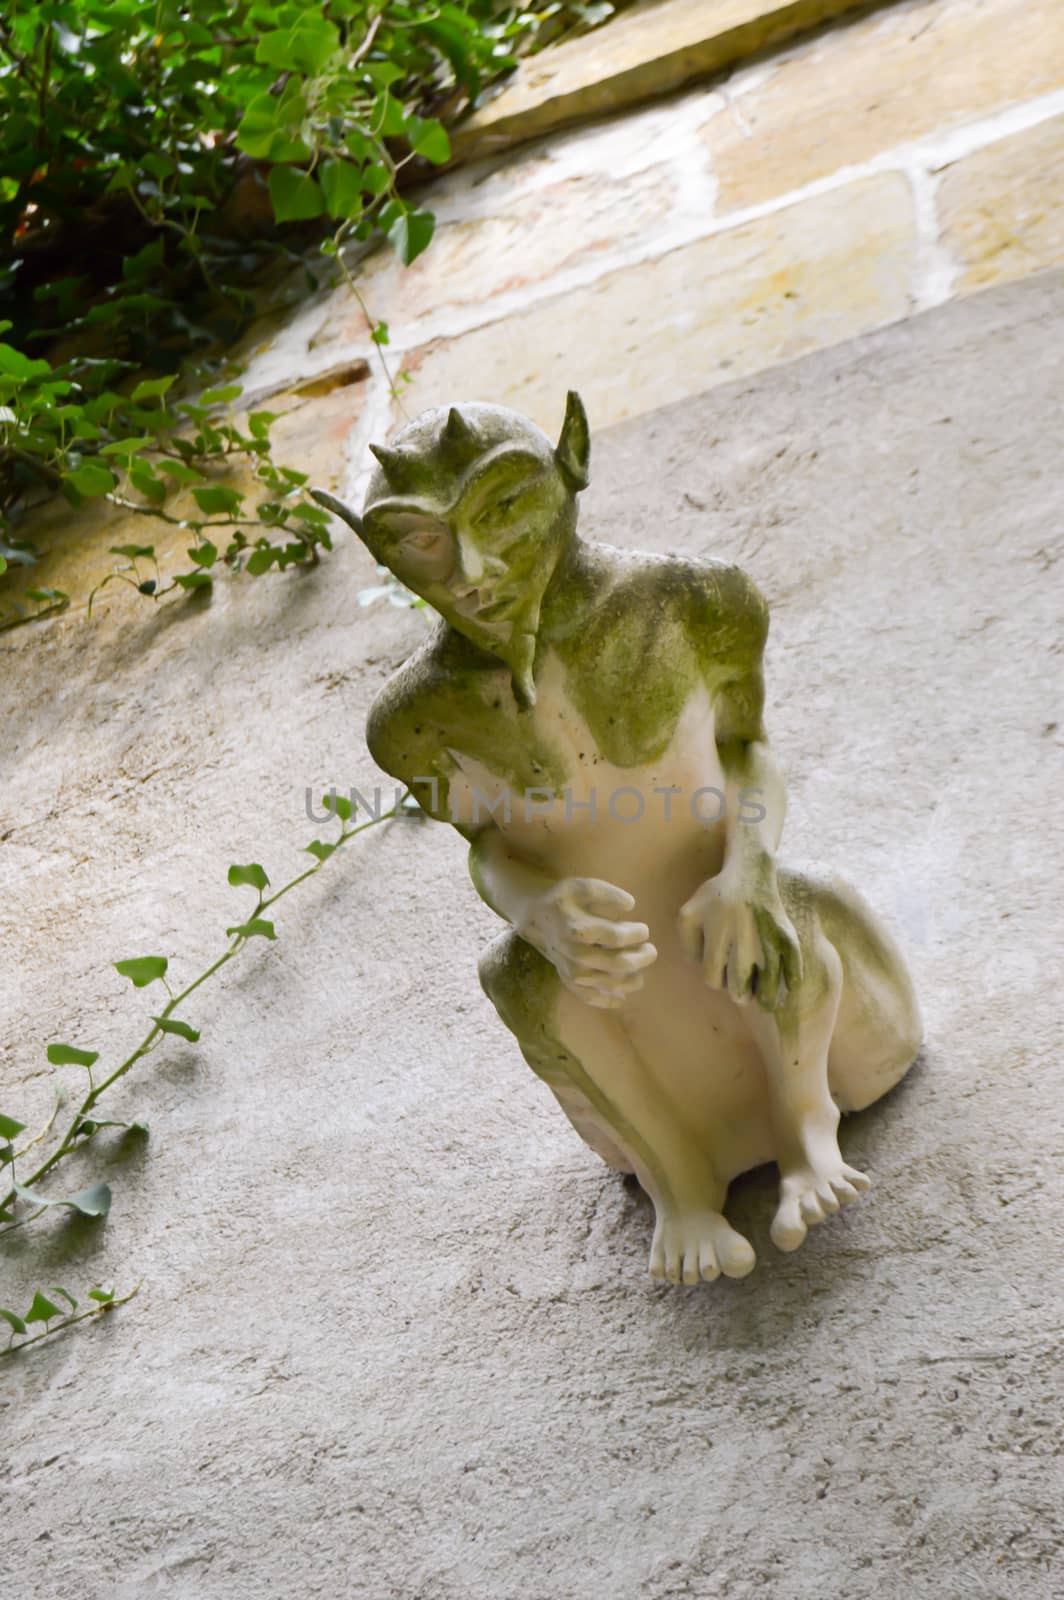 Gargoyle with horns and large ears on a wall in the town of Bar le Duc in the department of the Meuse in France